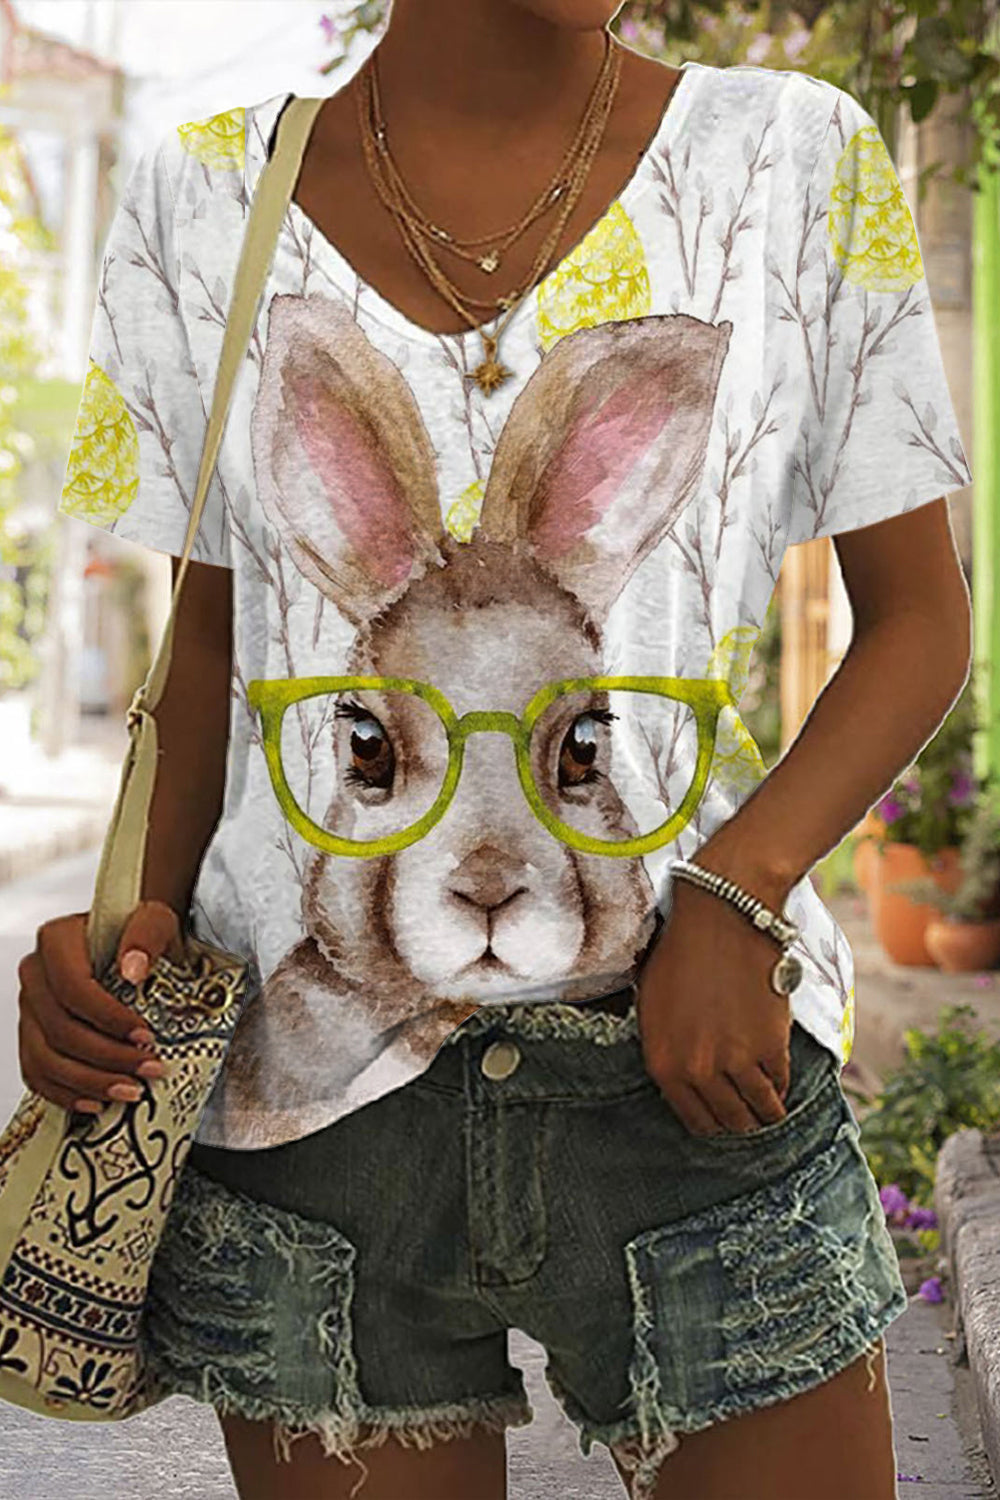 Cute Easter Bunny With Glasses In Easter Eggs Forest Printed V-neck Short Sleeve T-shirt